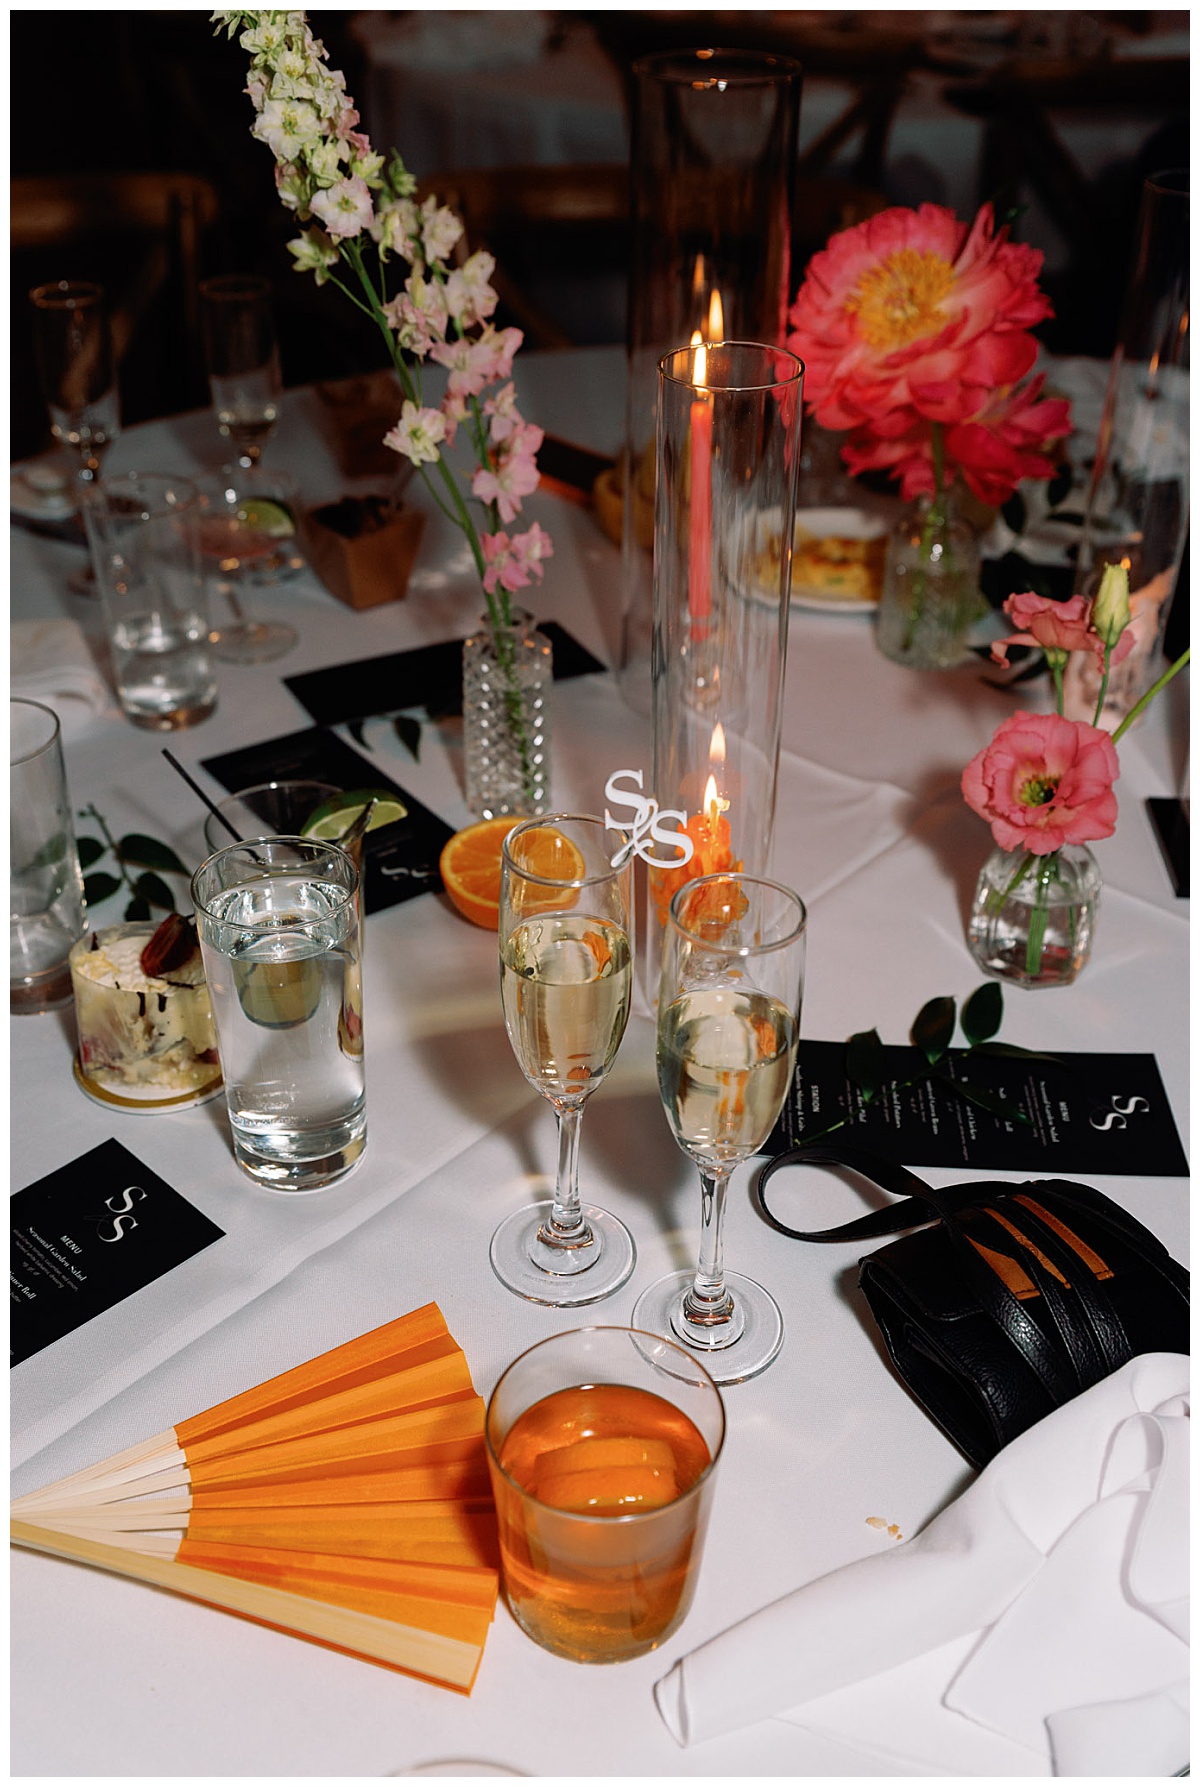 reception decor includes florals in small vases, candles, and monogramed champaign flutes by The Hazel Club